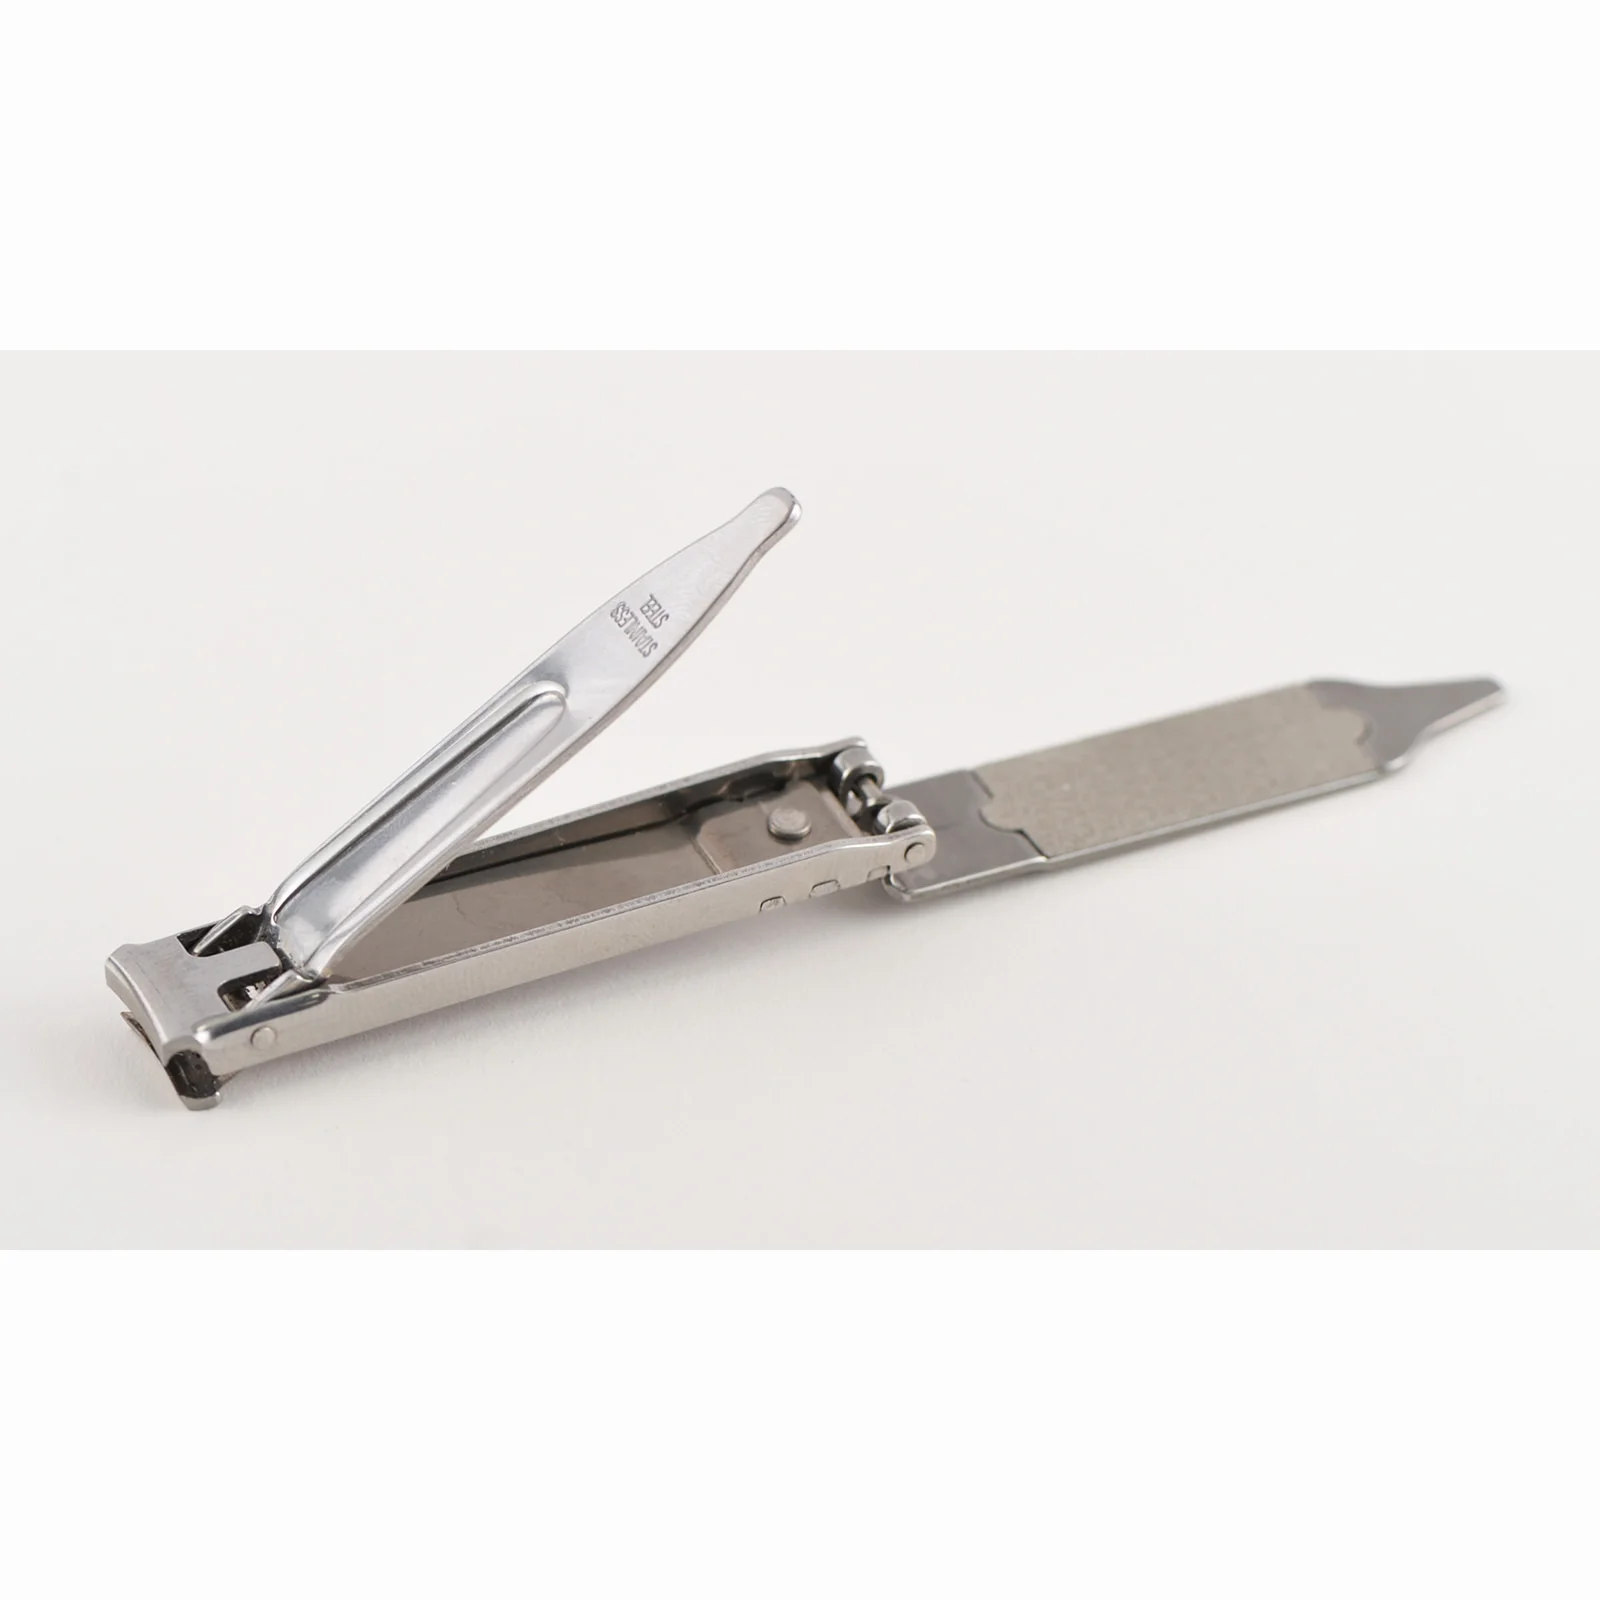 VICTORINOX Switzerland, High-quality nail clippers made of stainless steel  and plated with nickel, Nail file is included, Tool size: 6cm,  Manufactured: VICTORINOX Switzerland [8.2055.CB] - €9.99 : Euroblades.eu,  Online Store